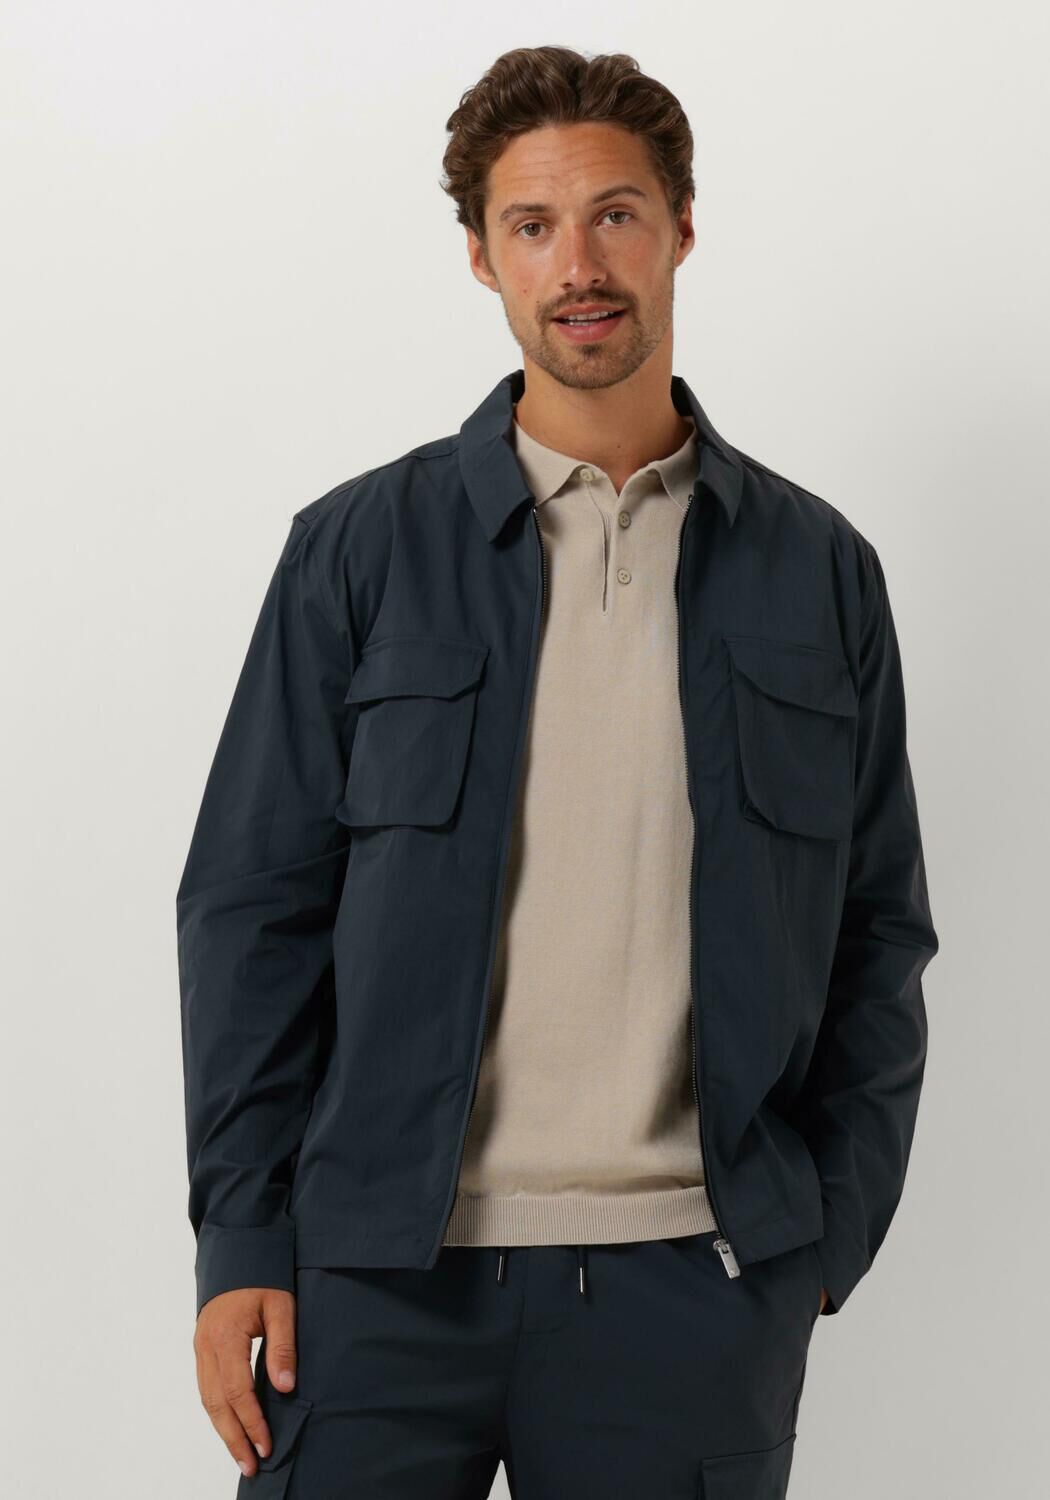 PURE PATH Heren Overshirts Shirt With Front Zipper And Chest Pockets Donkerblauw